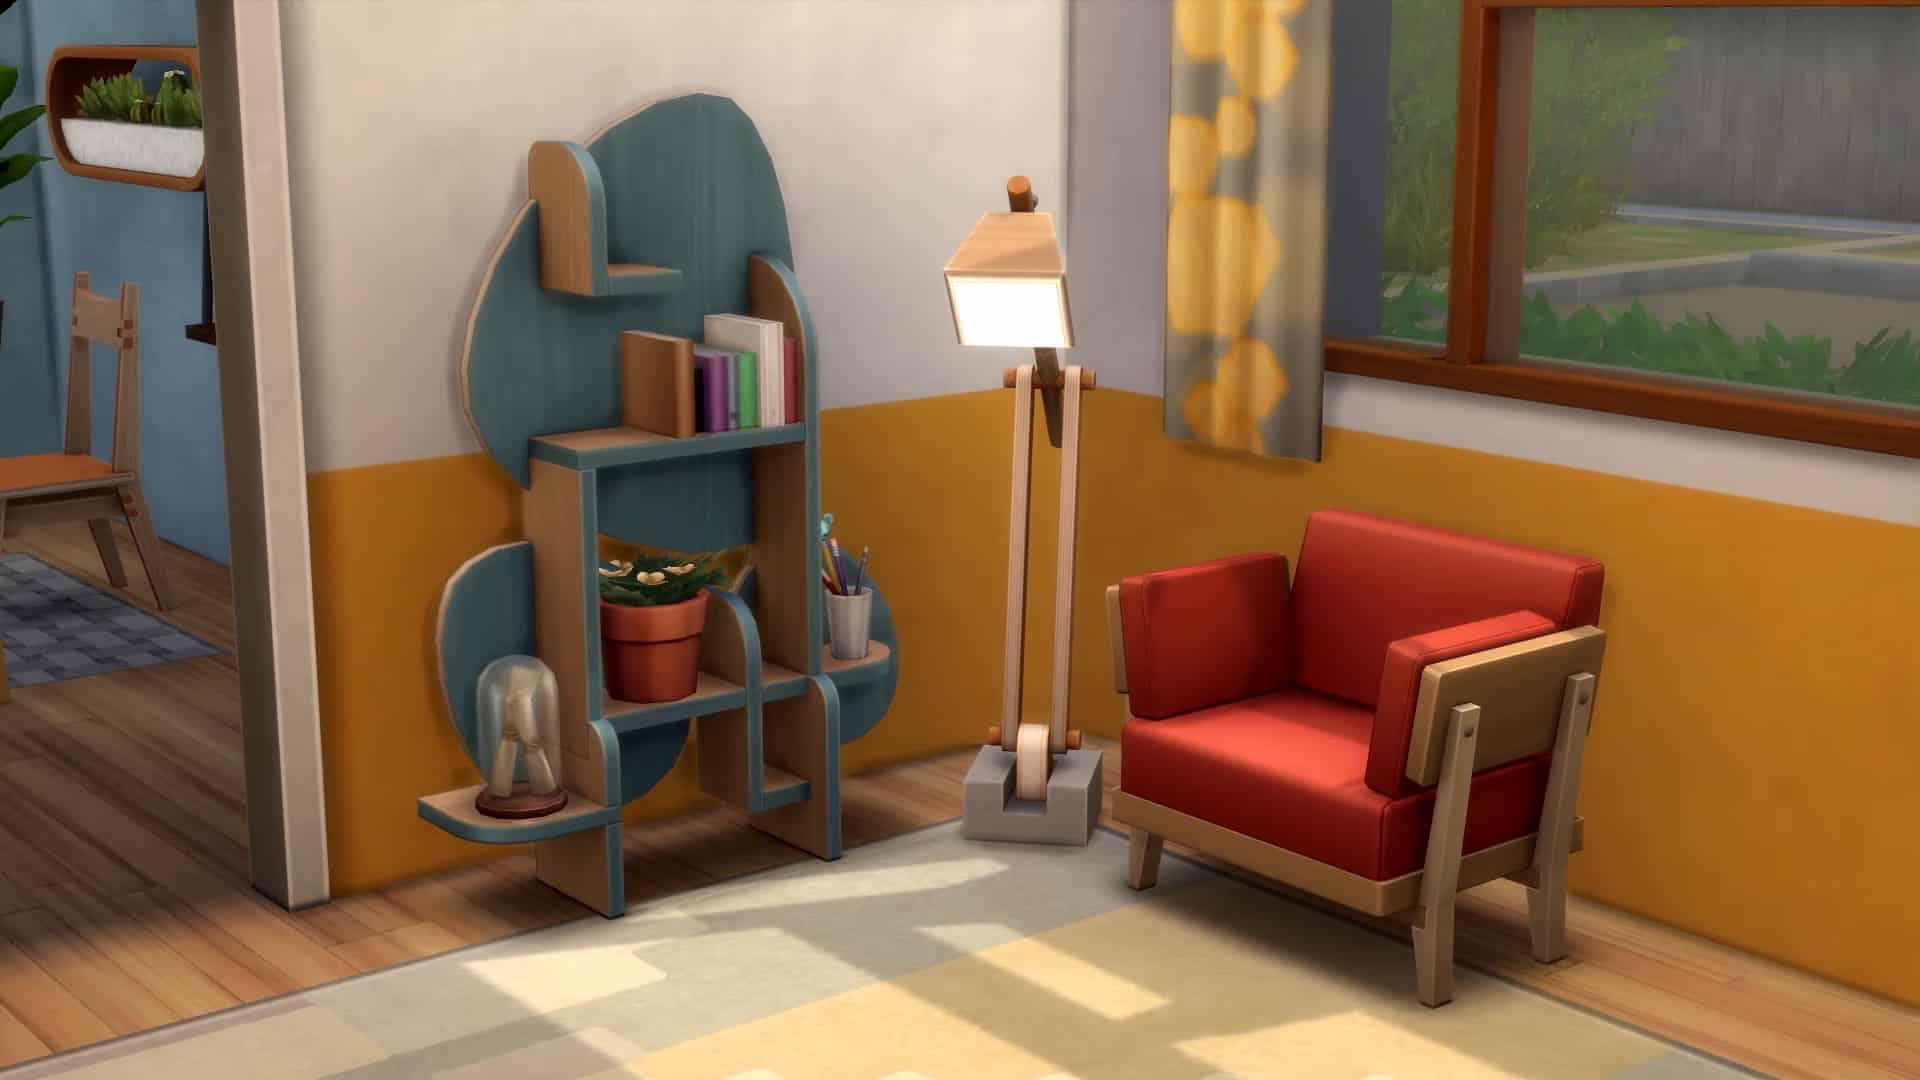 Recycle Furniture in Sims 4 Eco Lifestyle